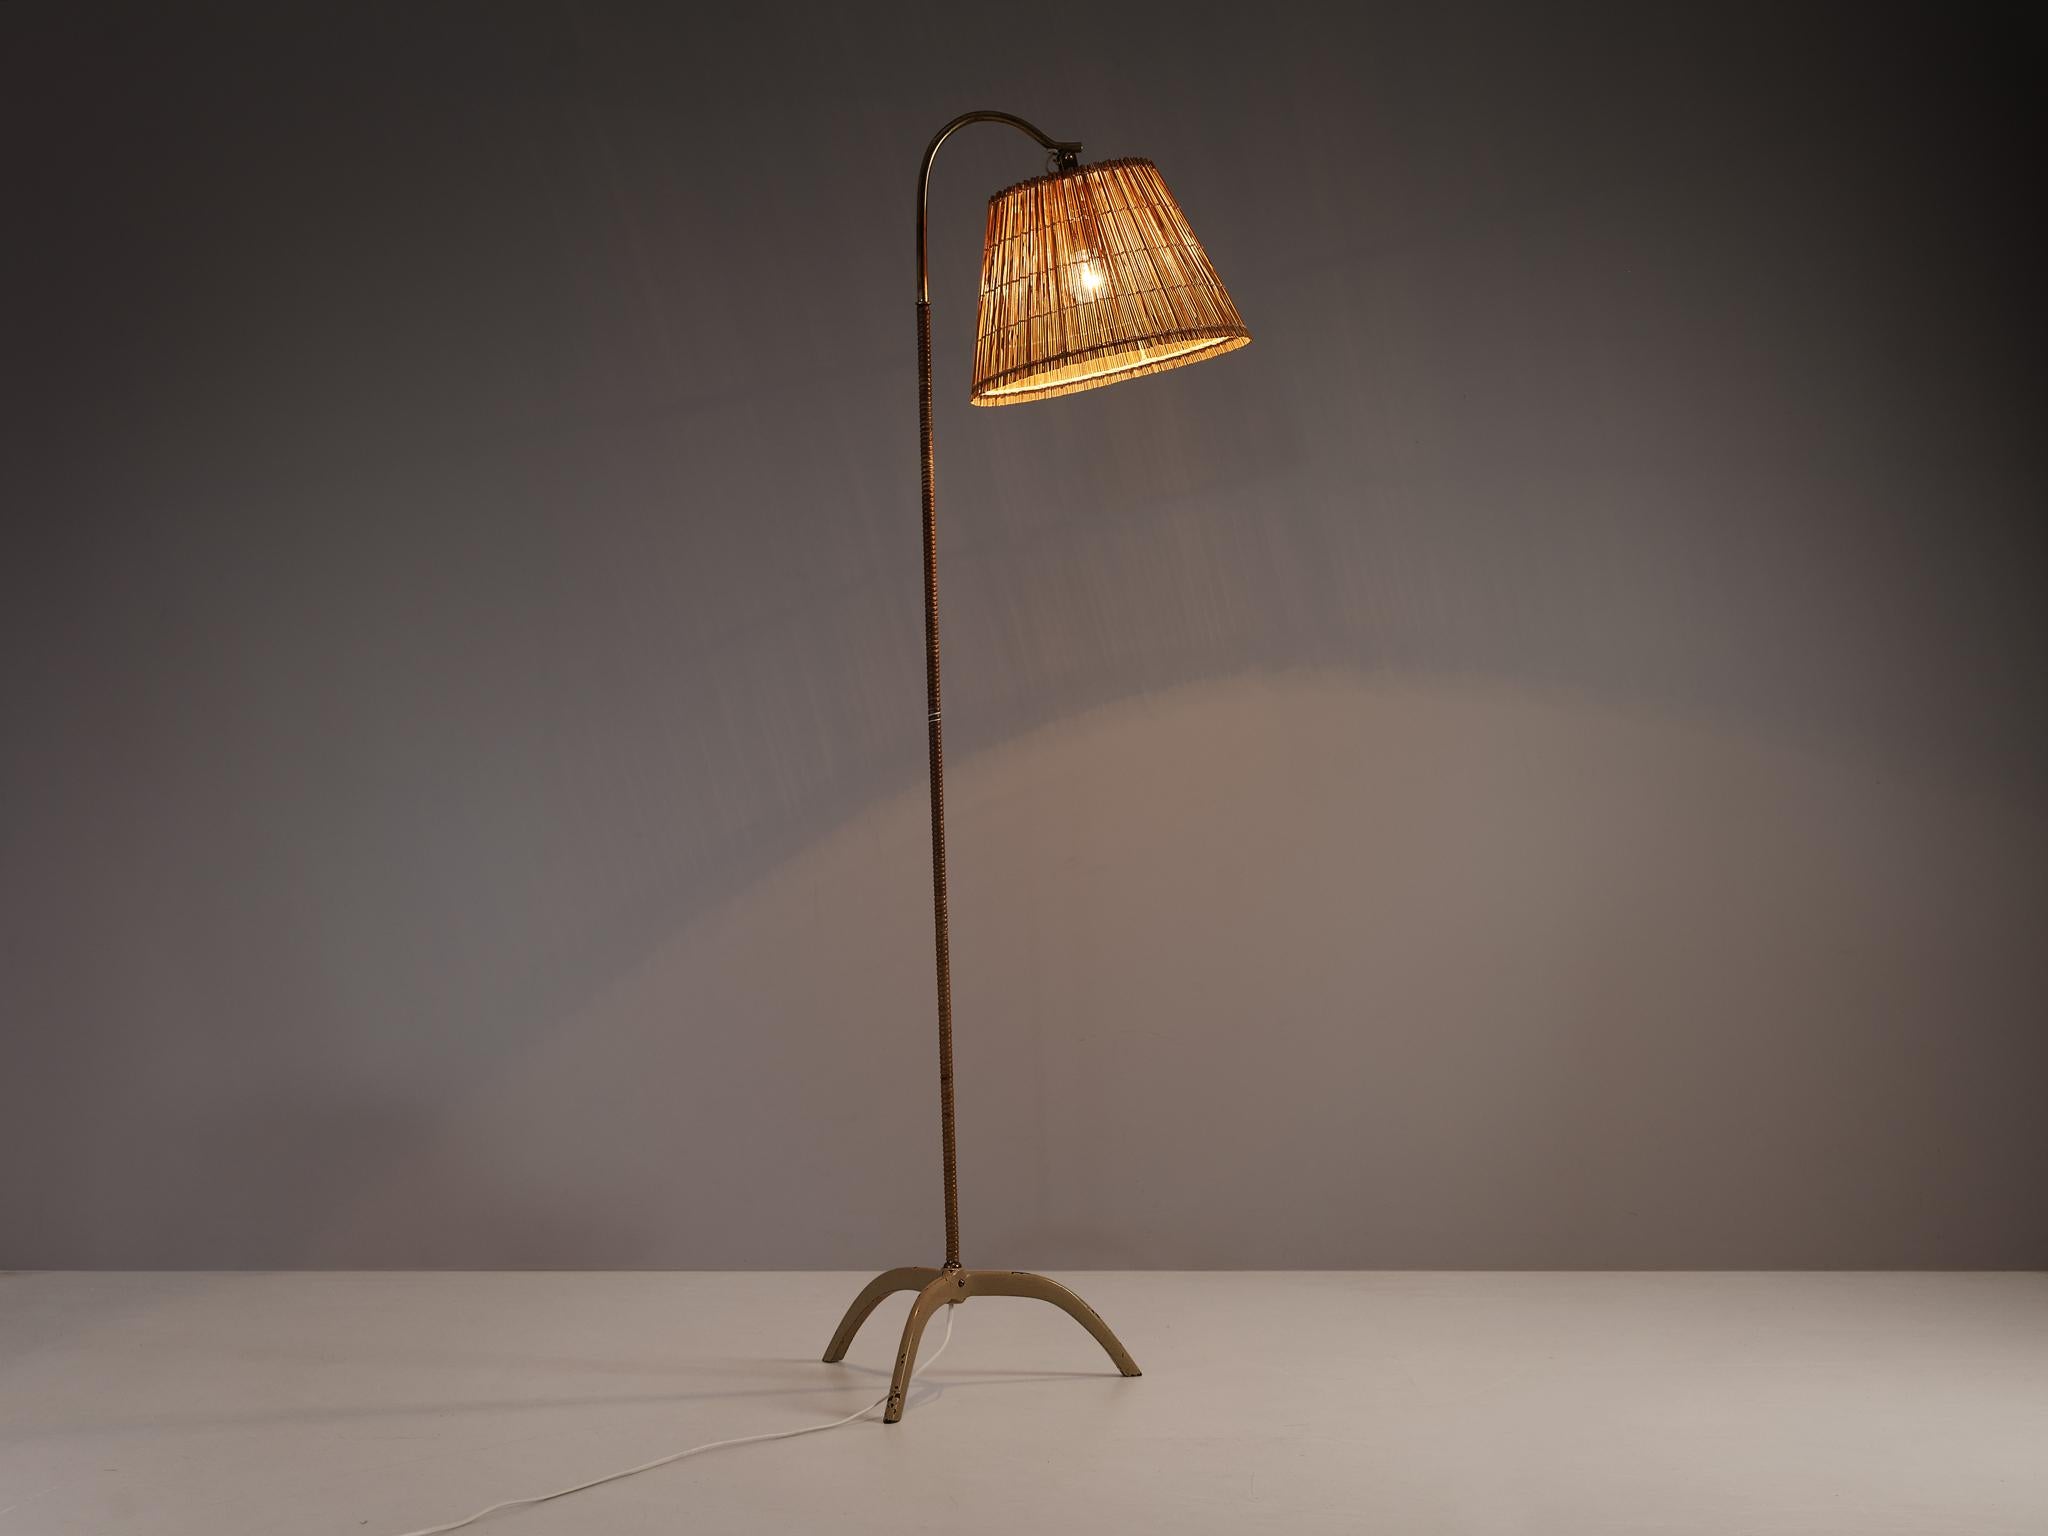 Paavo Tynell for Taito, floor lamp model 9609, metal, brass, cane, fabric, Finland, 1950s

This floor lamp model '9609' by Finnish designer Paavo Tynell is a visual pleasure in many senses. Firstly, the surprising lines of the tripod base. For